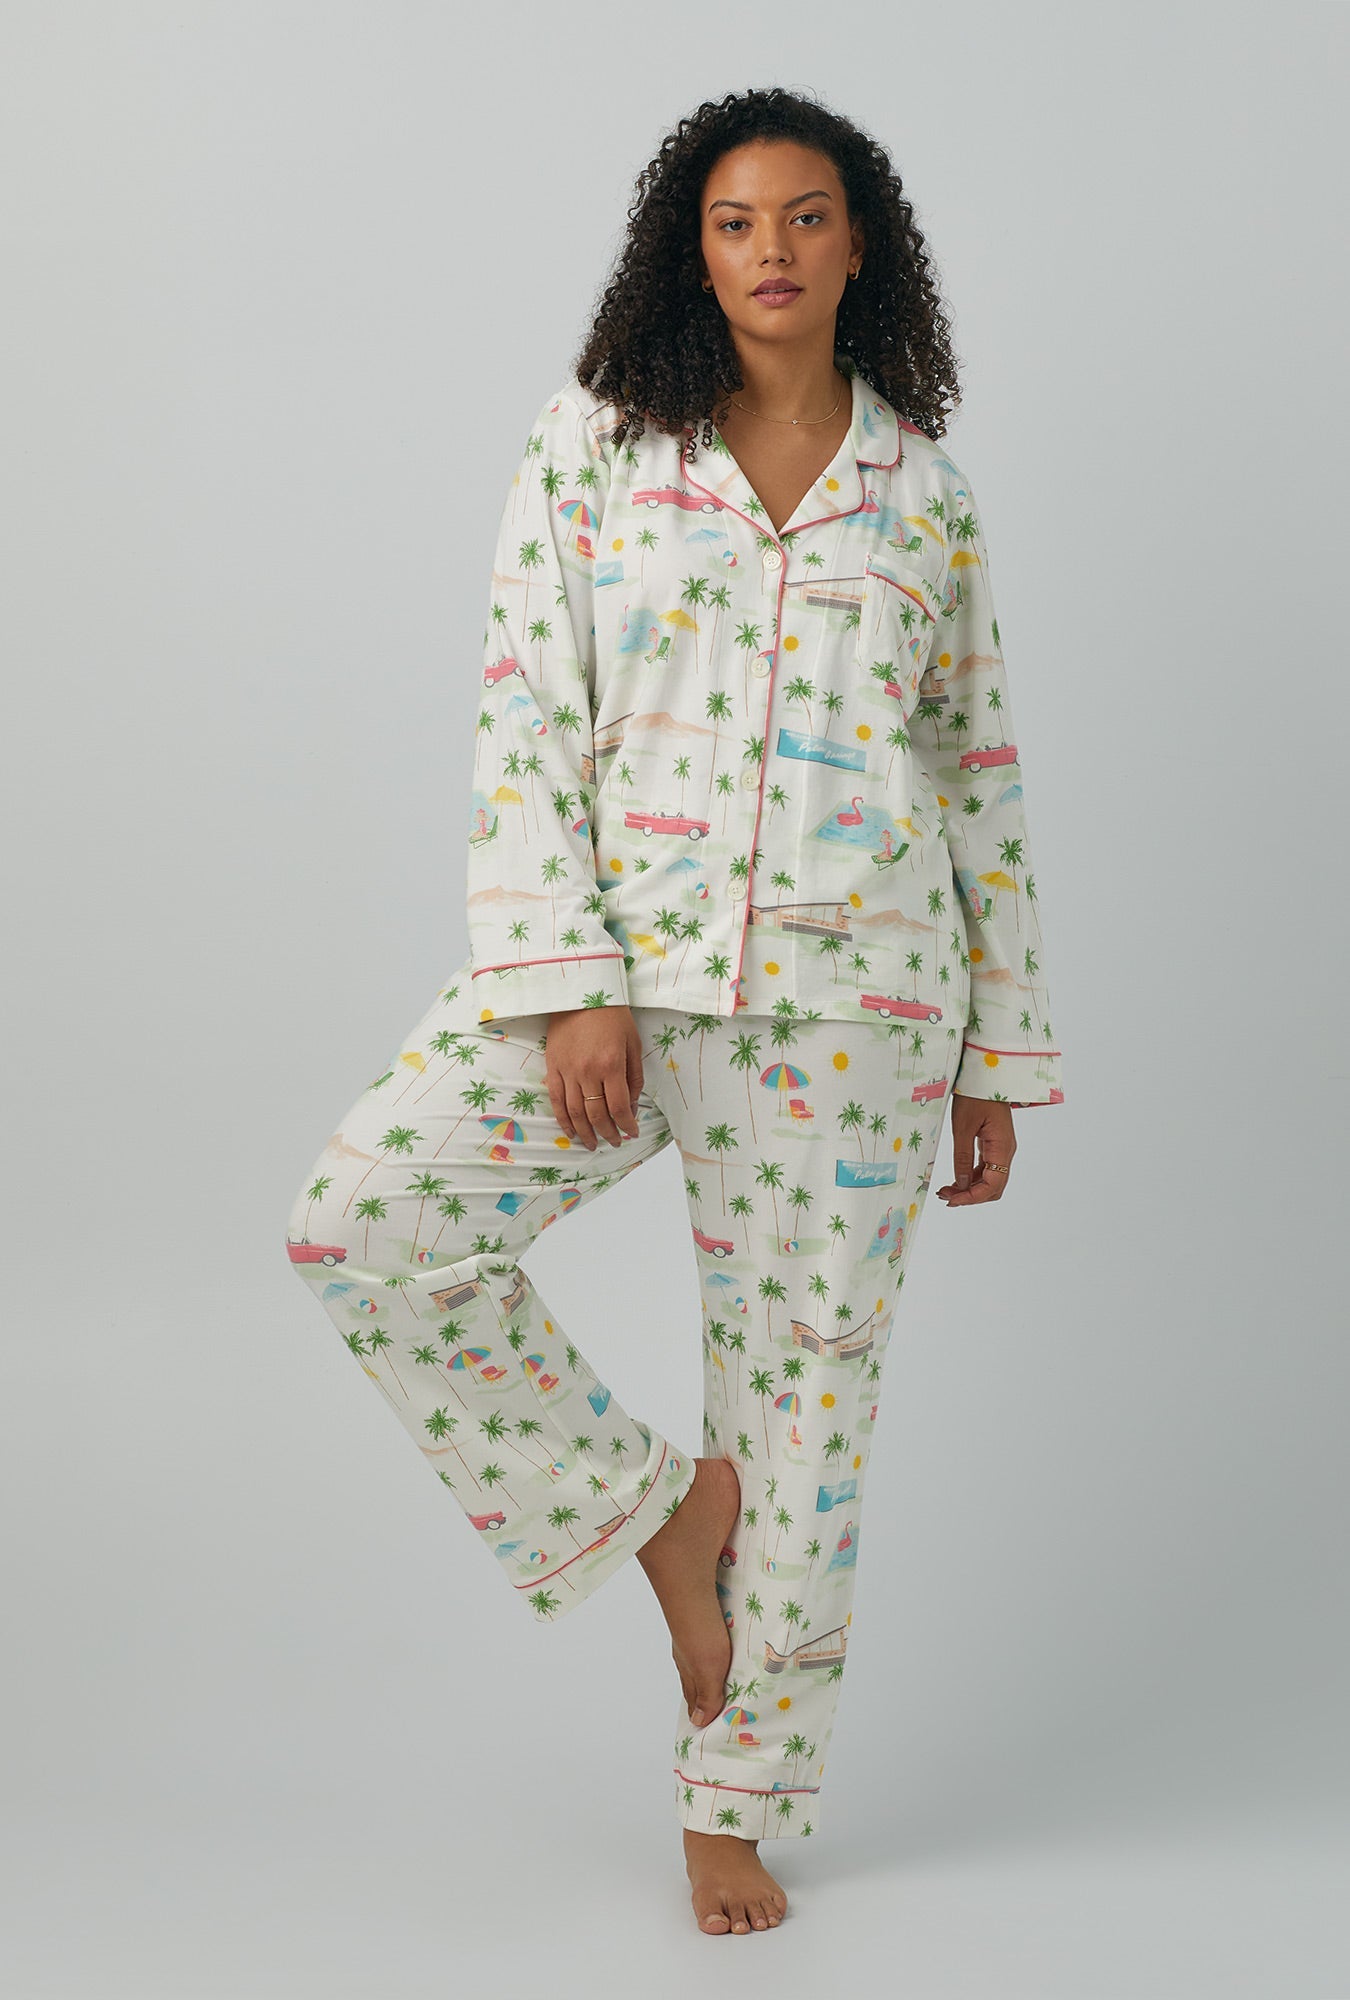 Bed Head Welcome To Palm Springs L/S Classic Stretch Jersey PJ Set